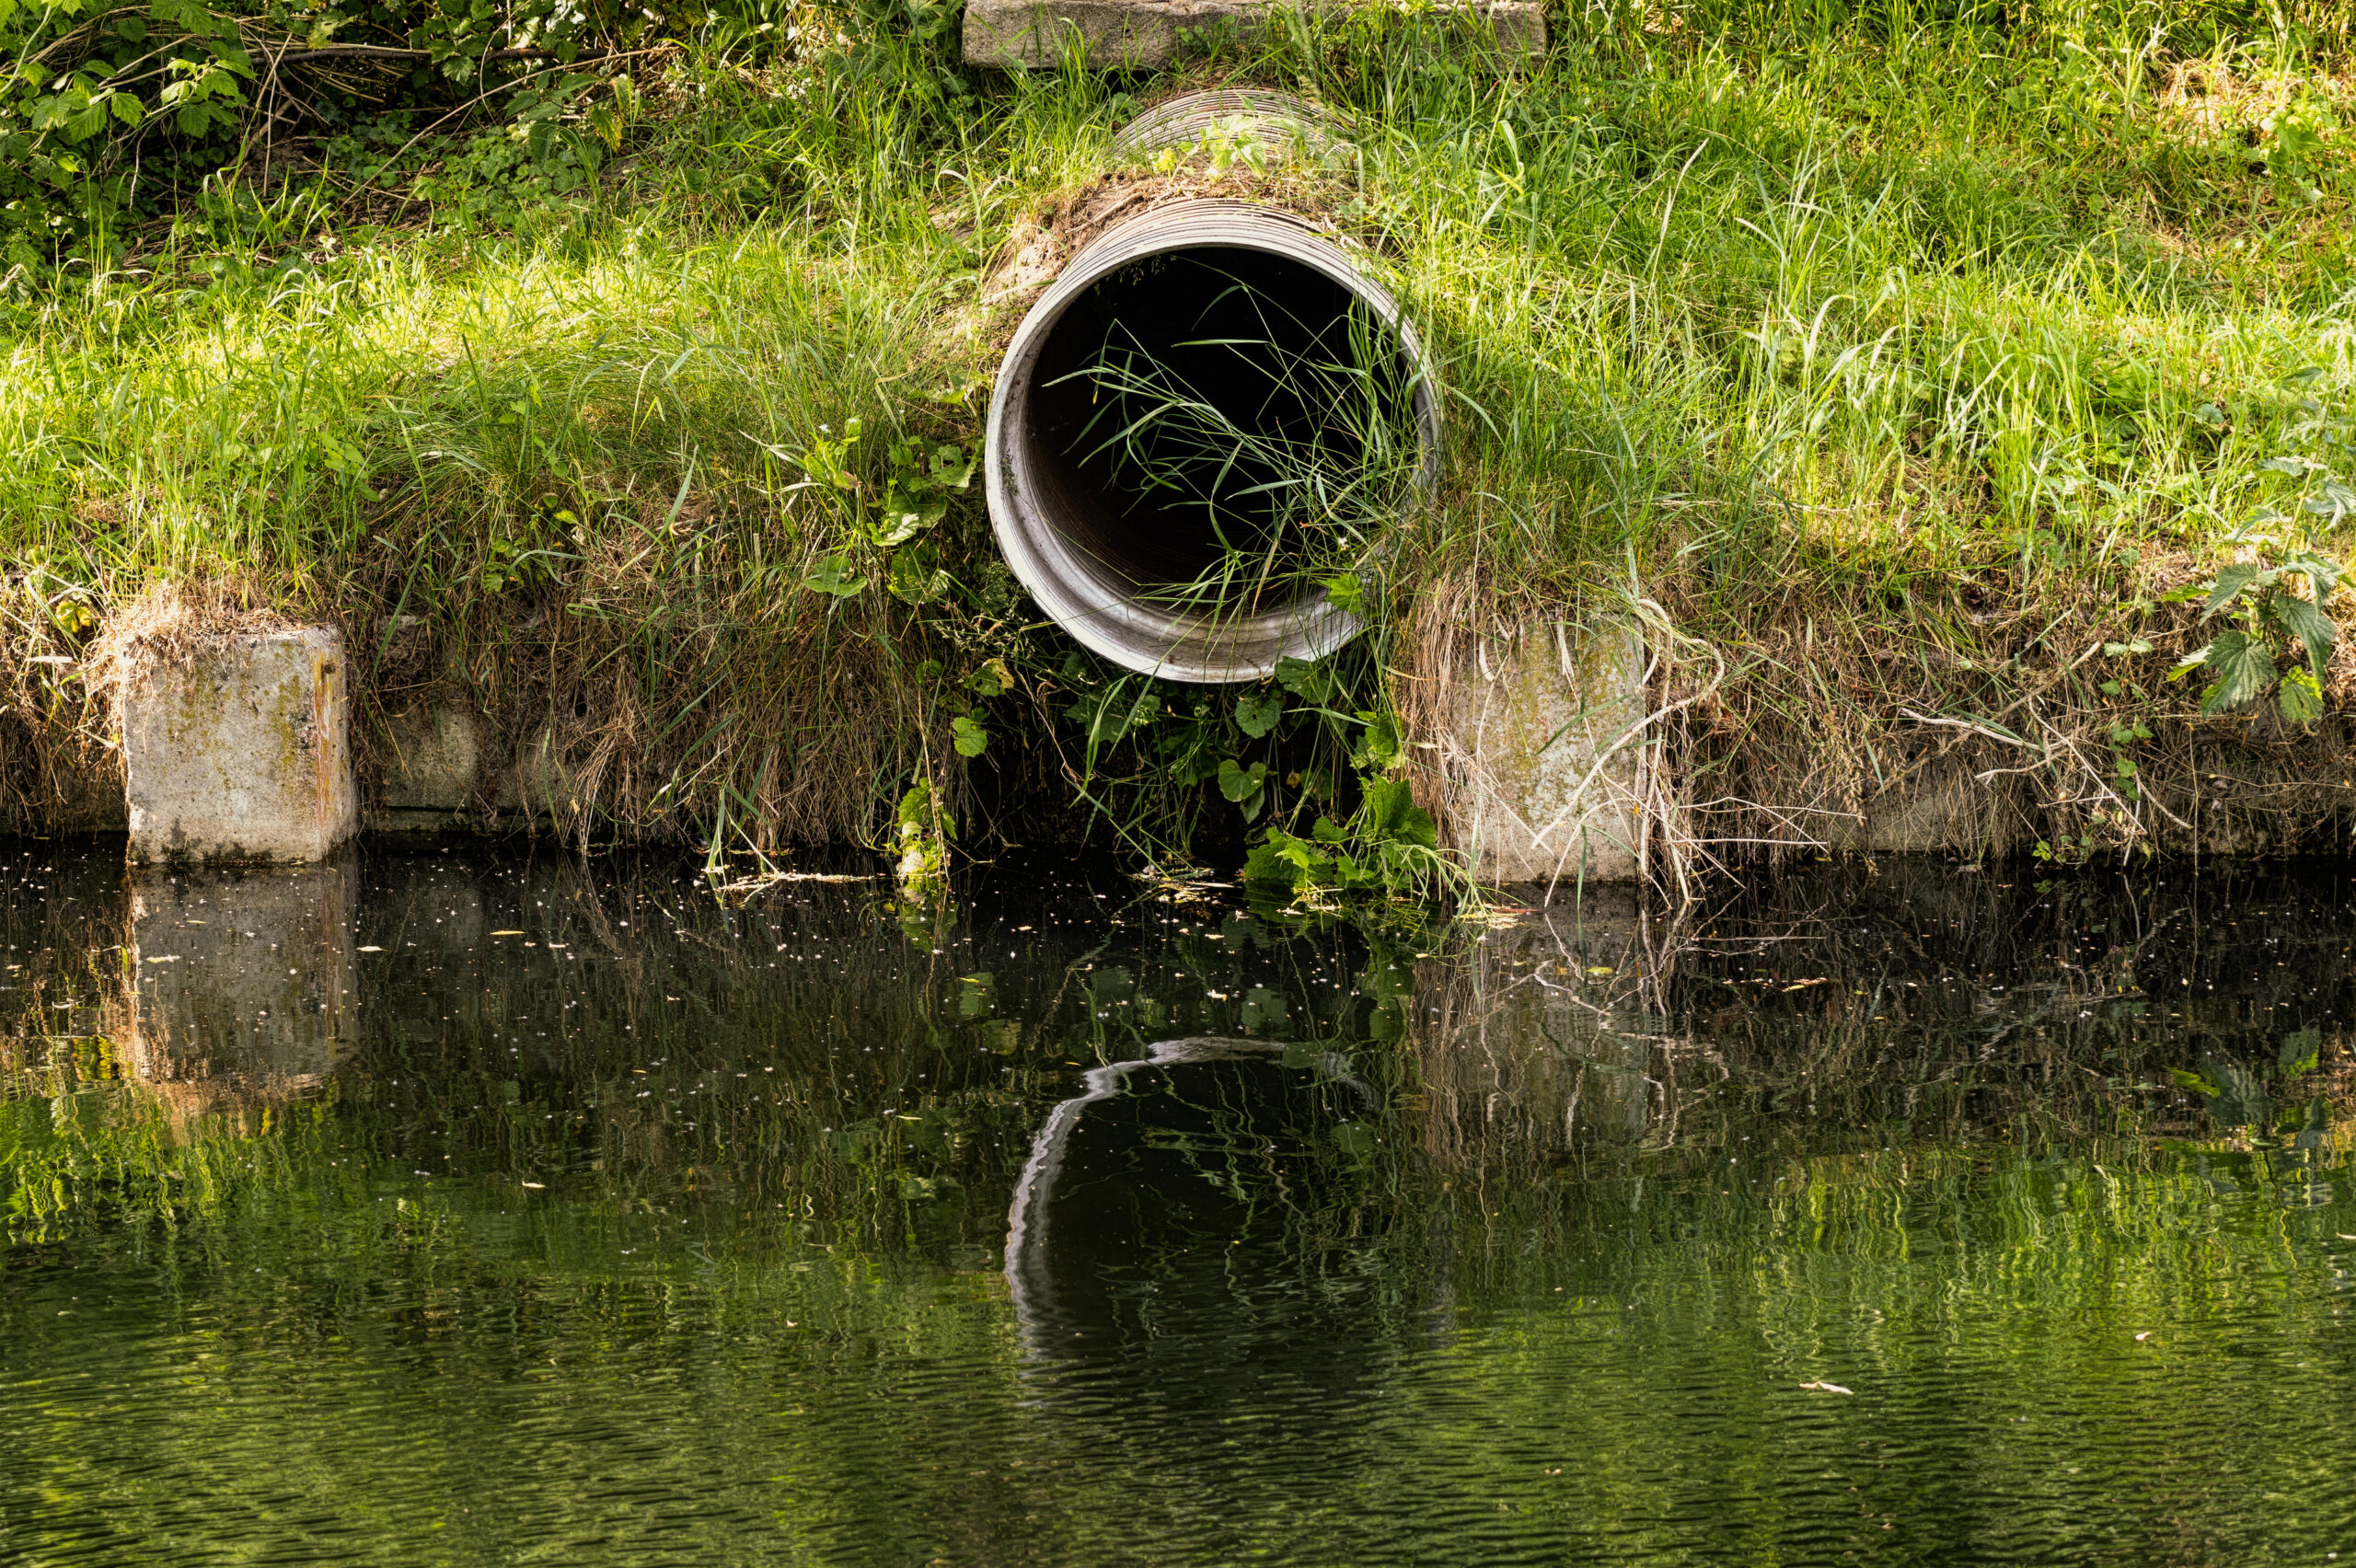 UK water company sewage discharge pipe